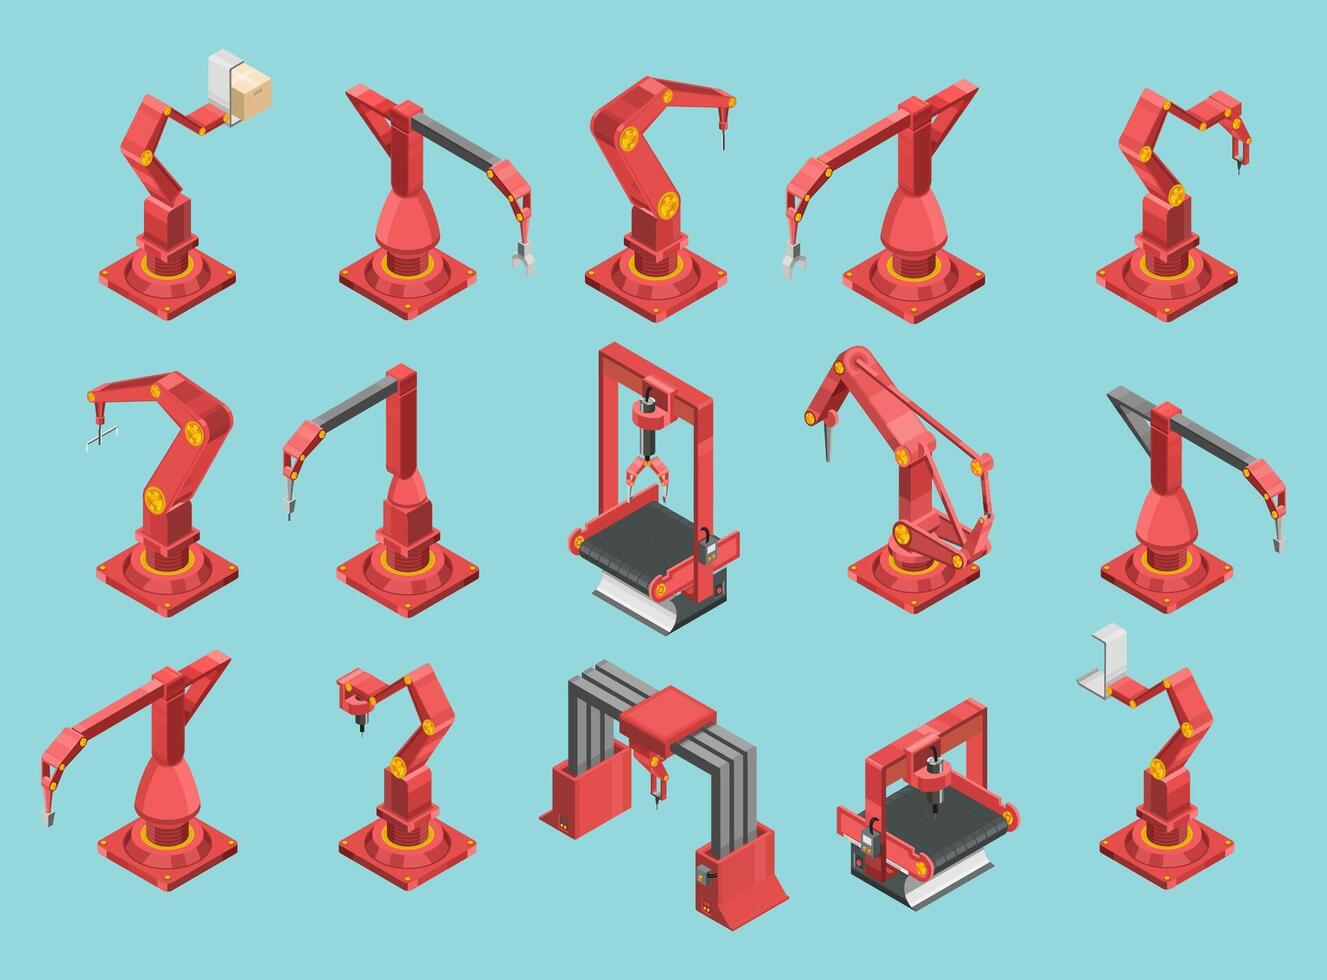 Isometric set of red and grey conveyor machines with robotic hands. Automatic equipment industry technology concept. Vector illustration.